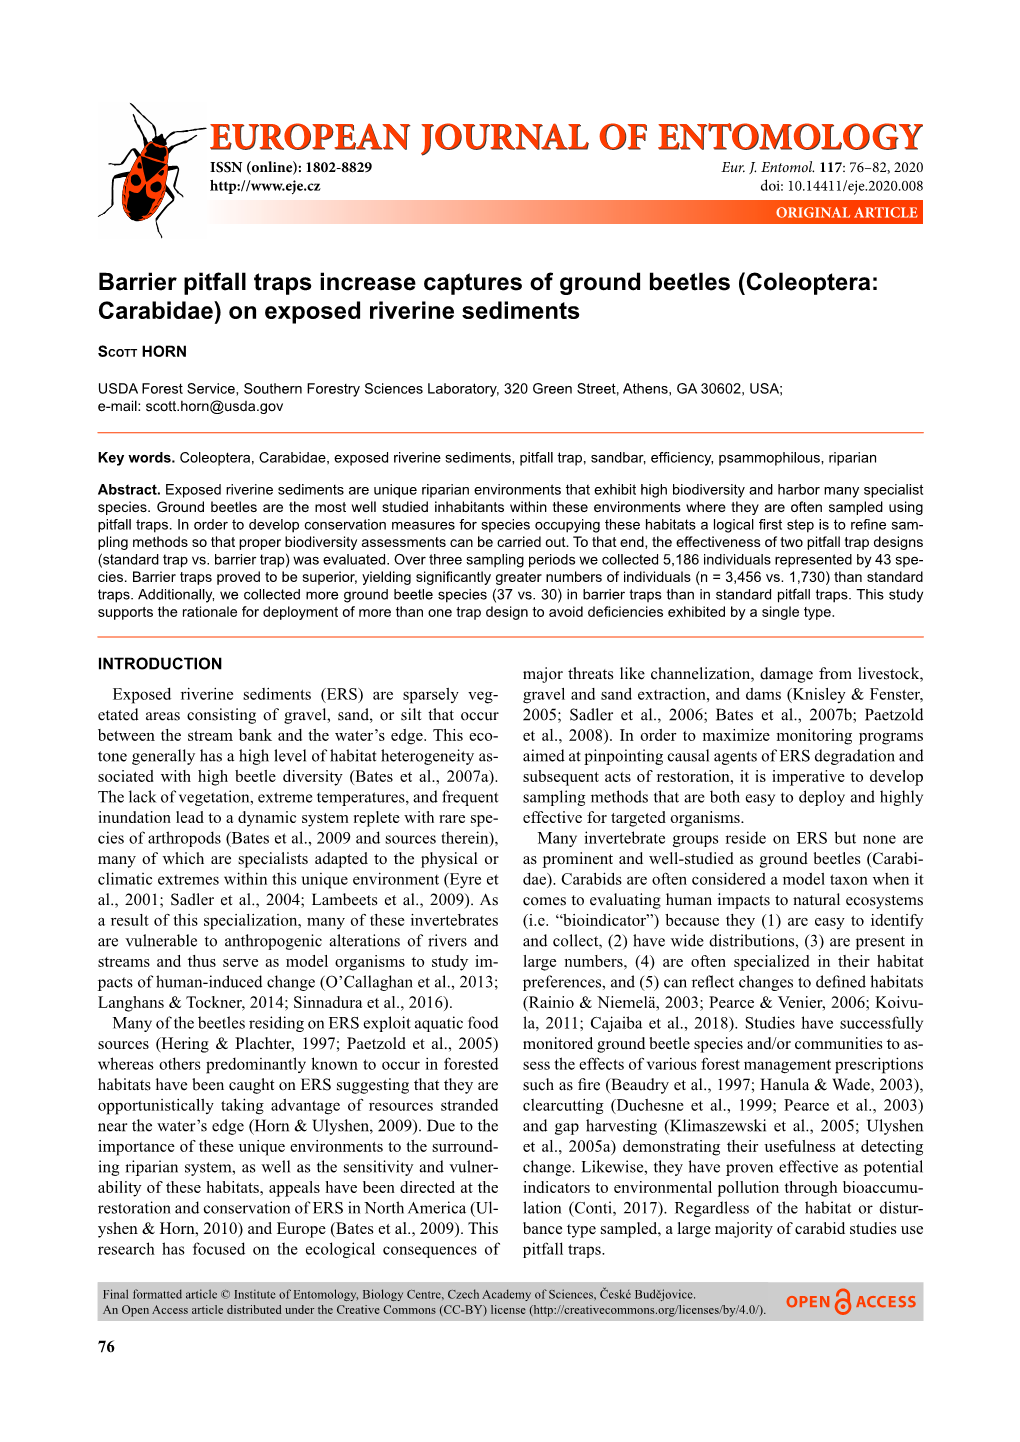 Barrier Pitfall Traps Increase Captures of Ground Beetles (Coleoptera: Carabidae) on Exposed Riverine Sediments